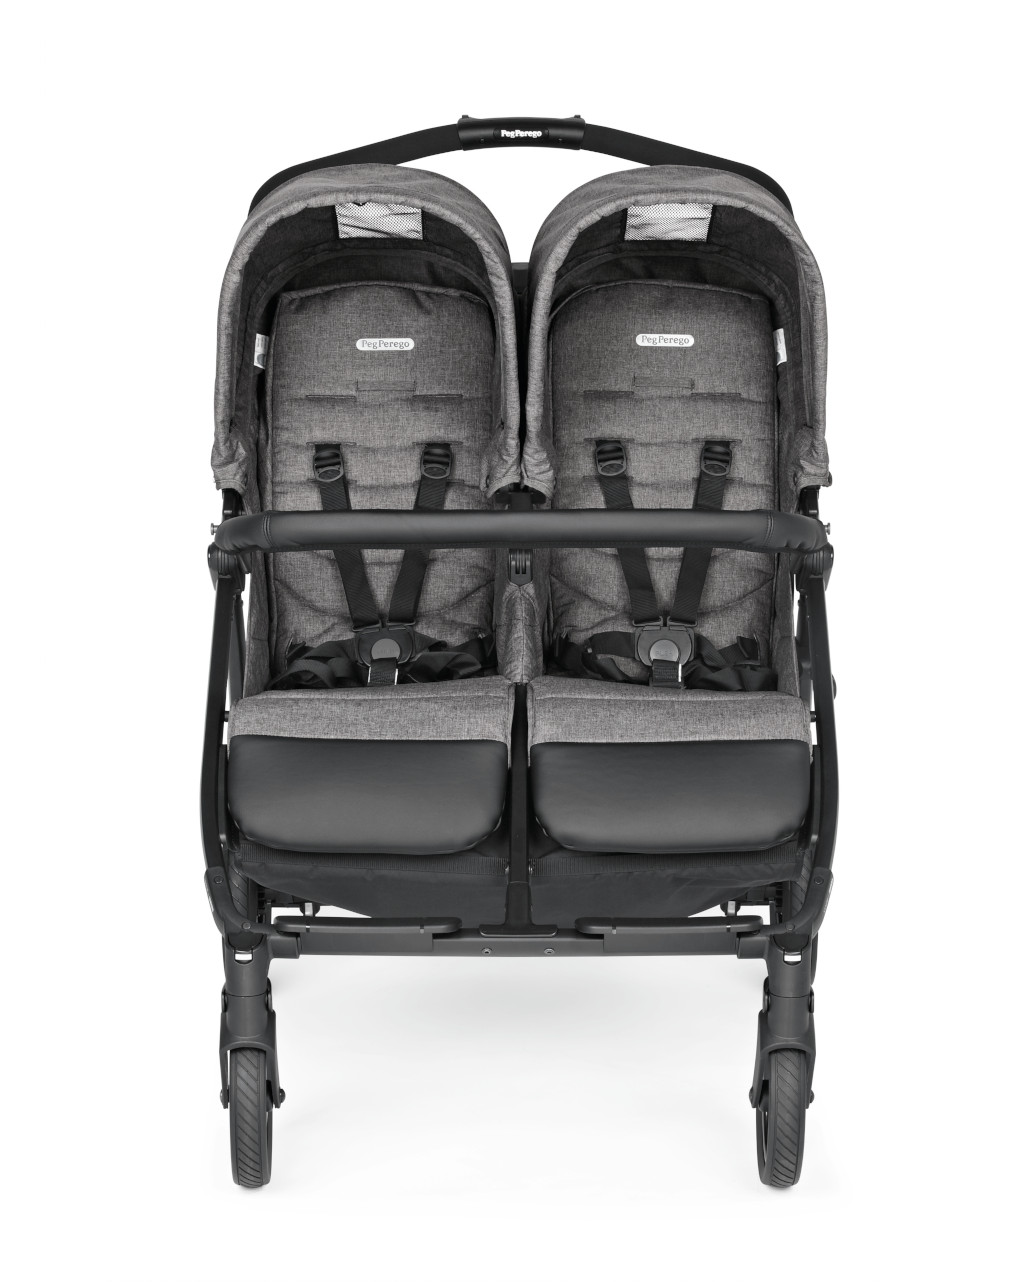 Book for two - peg perego